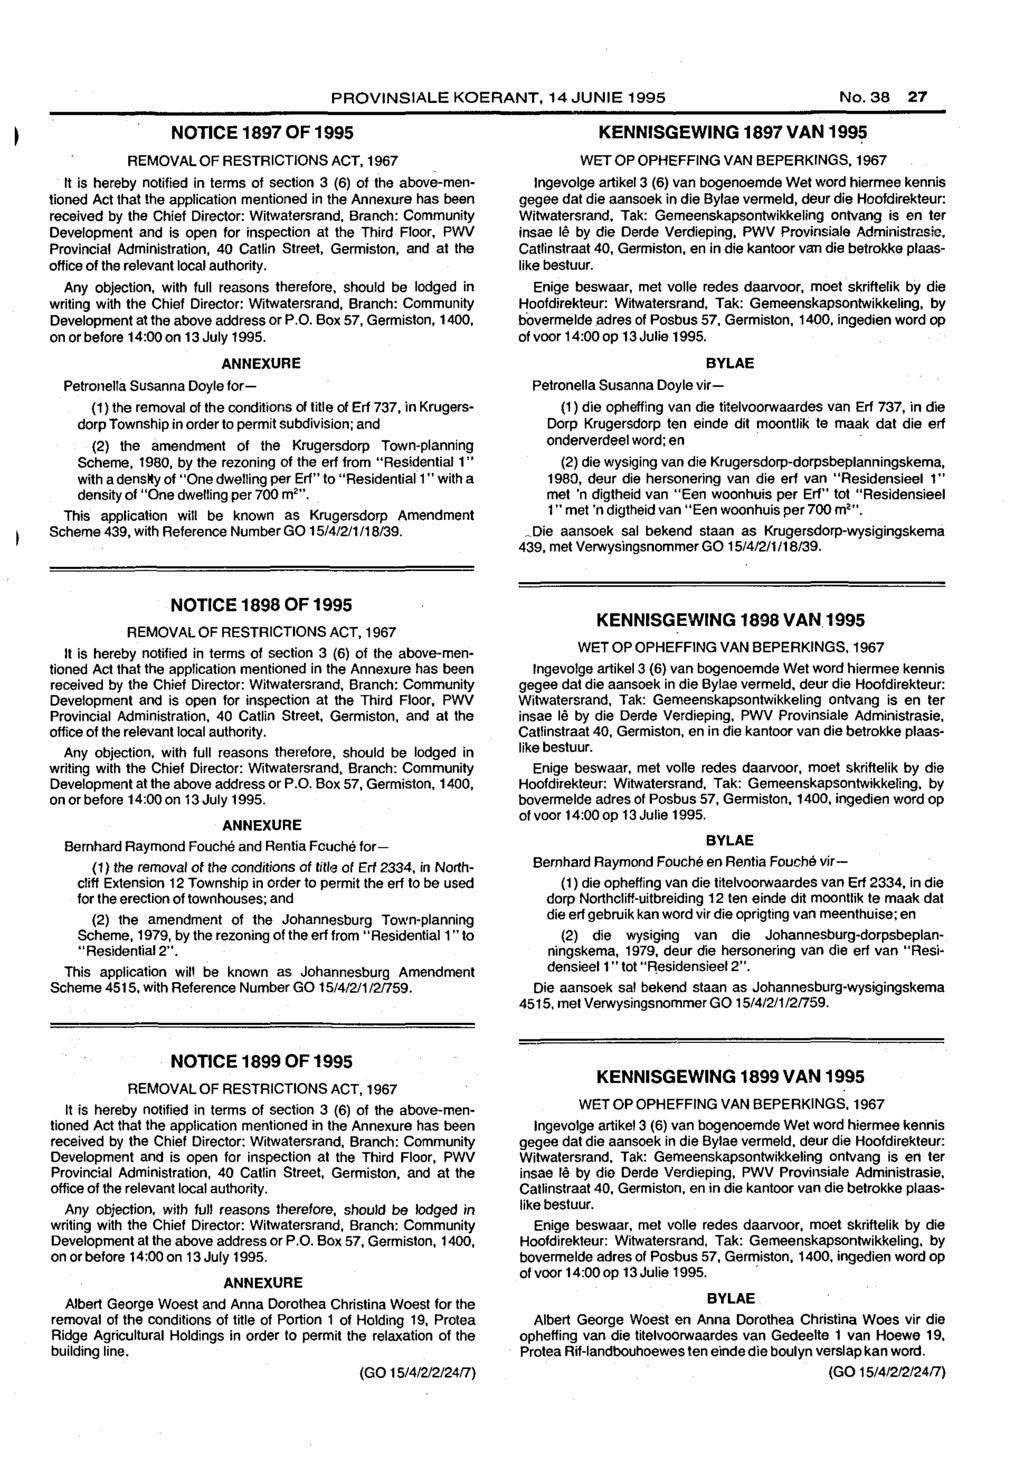 PROVINSIALE KOERANT, 14 JUNIE 1995 No. 27 NOTICE 1897 OF 1995 REMOVAL OF RESTRICTIONS ACT, 1967 It is hereby notified in terms of section 3 (6) of the above-mentioned Act that!